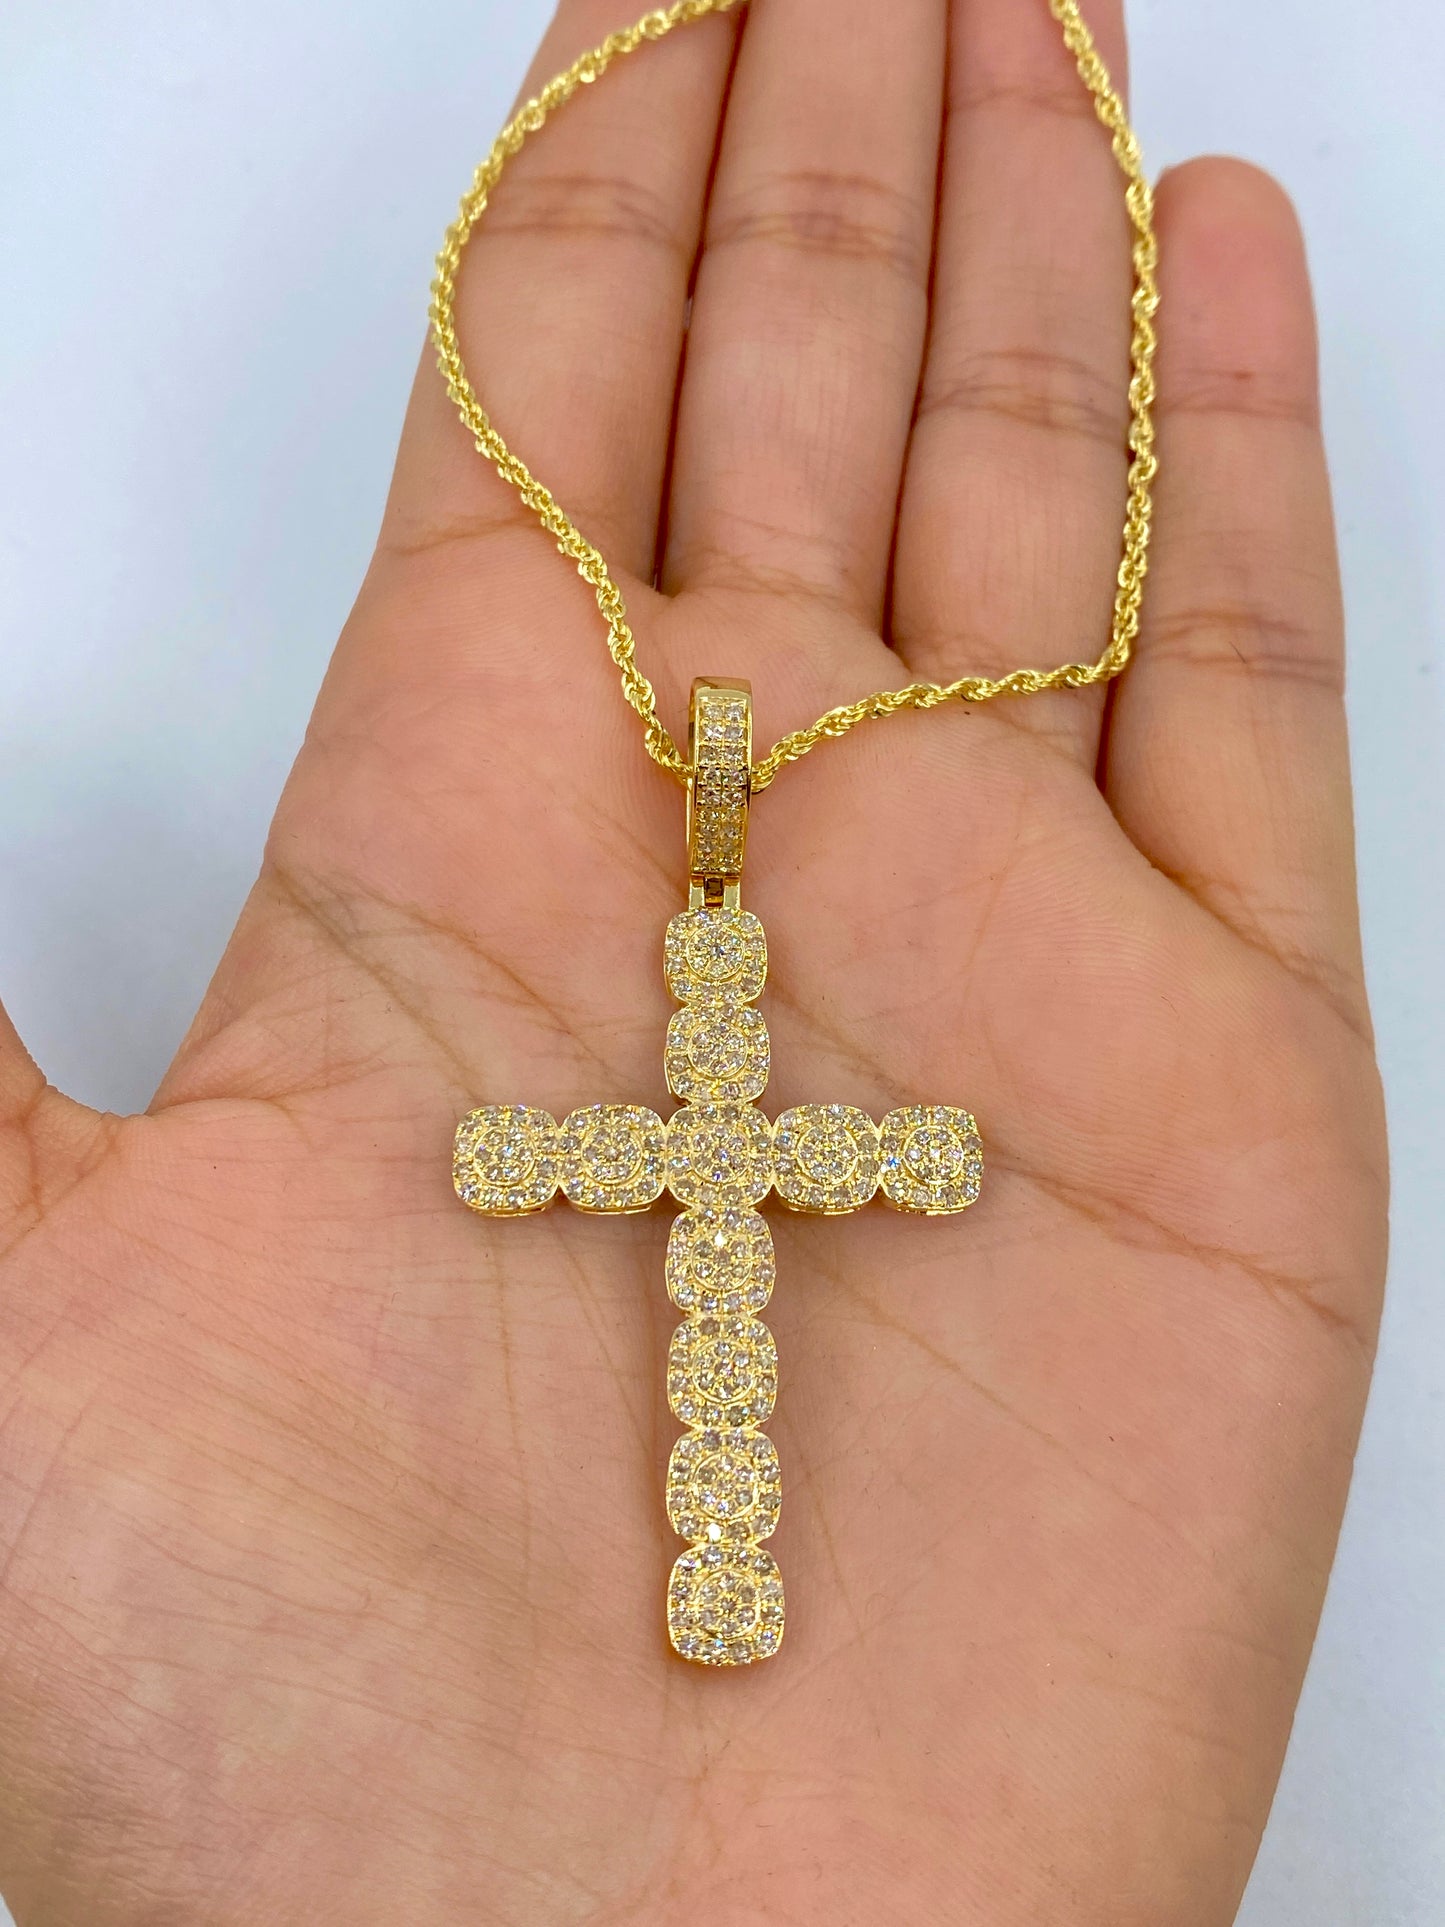 10K Diamond Cross Pendant With Chain Included